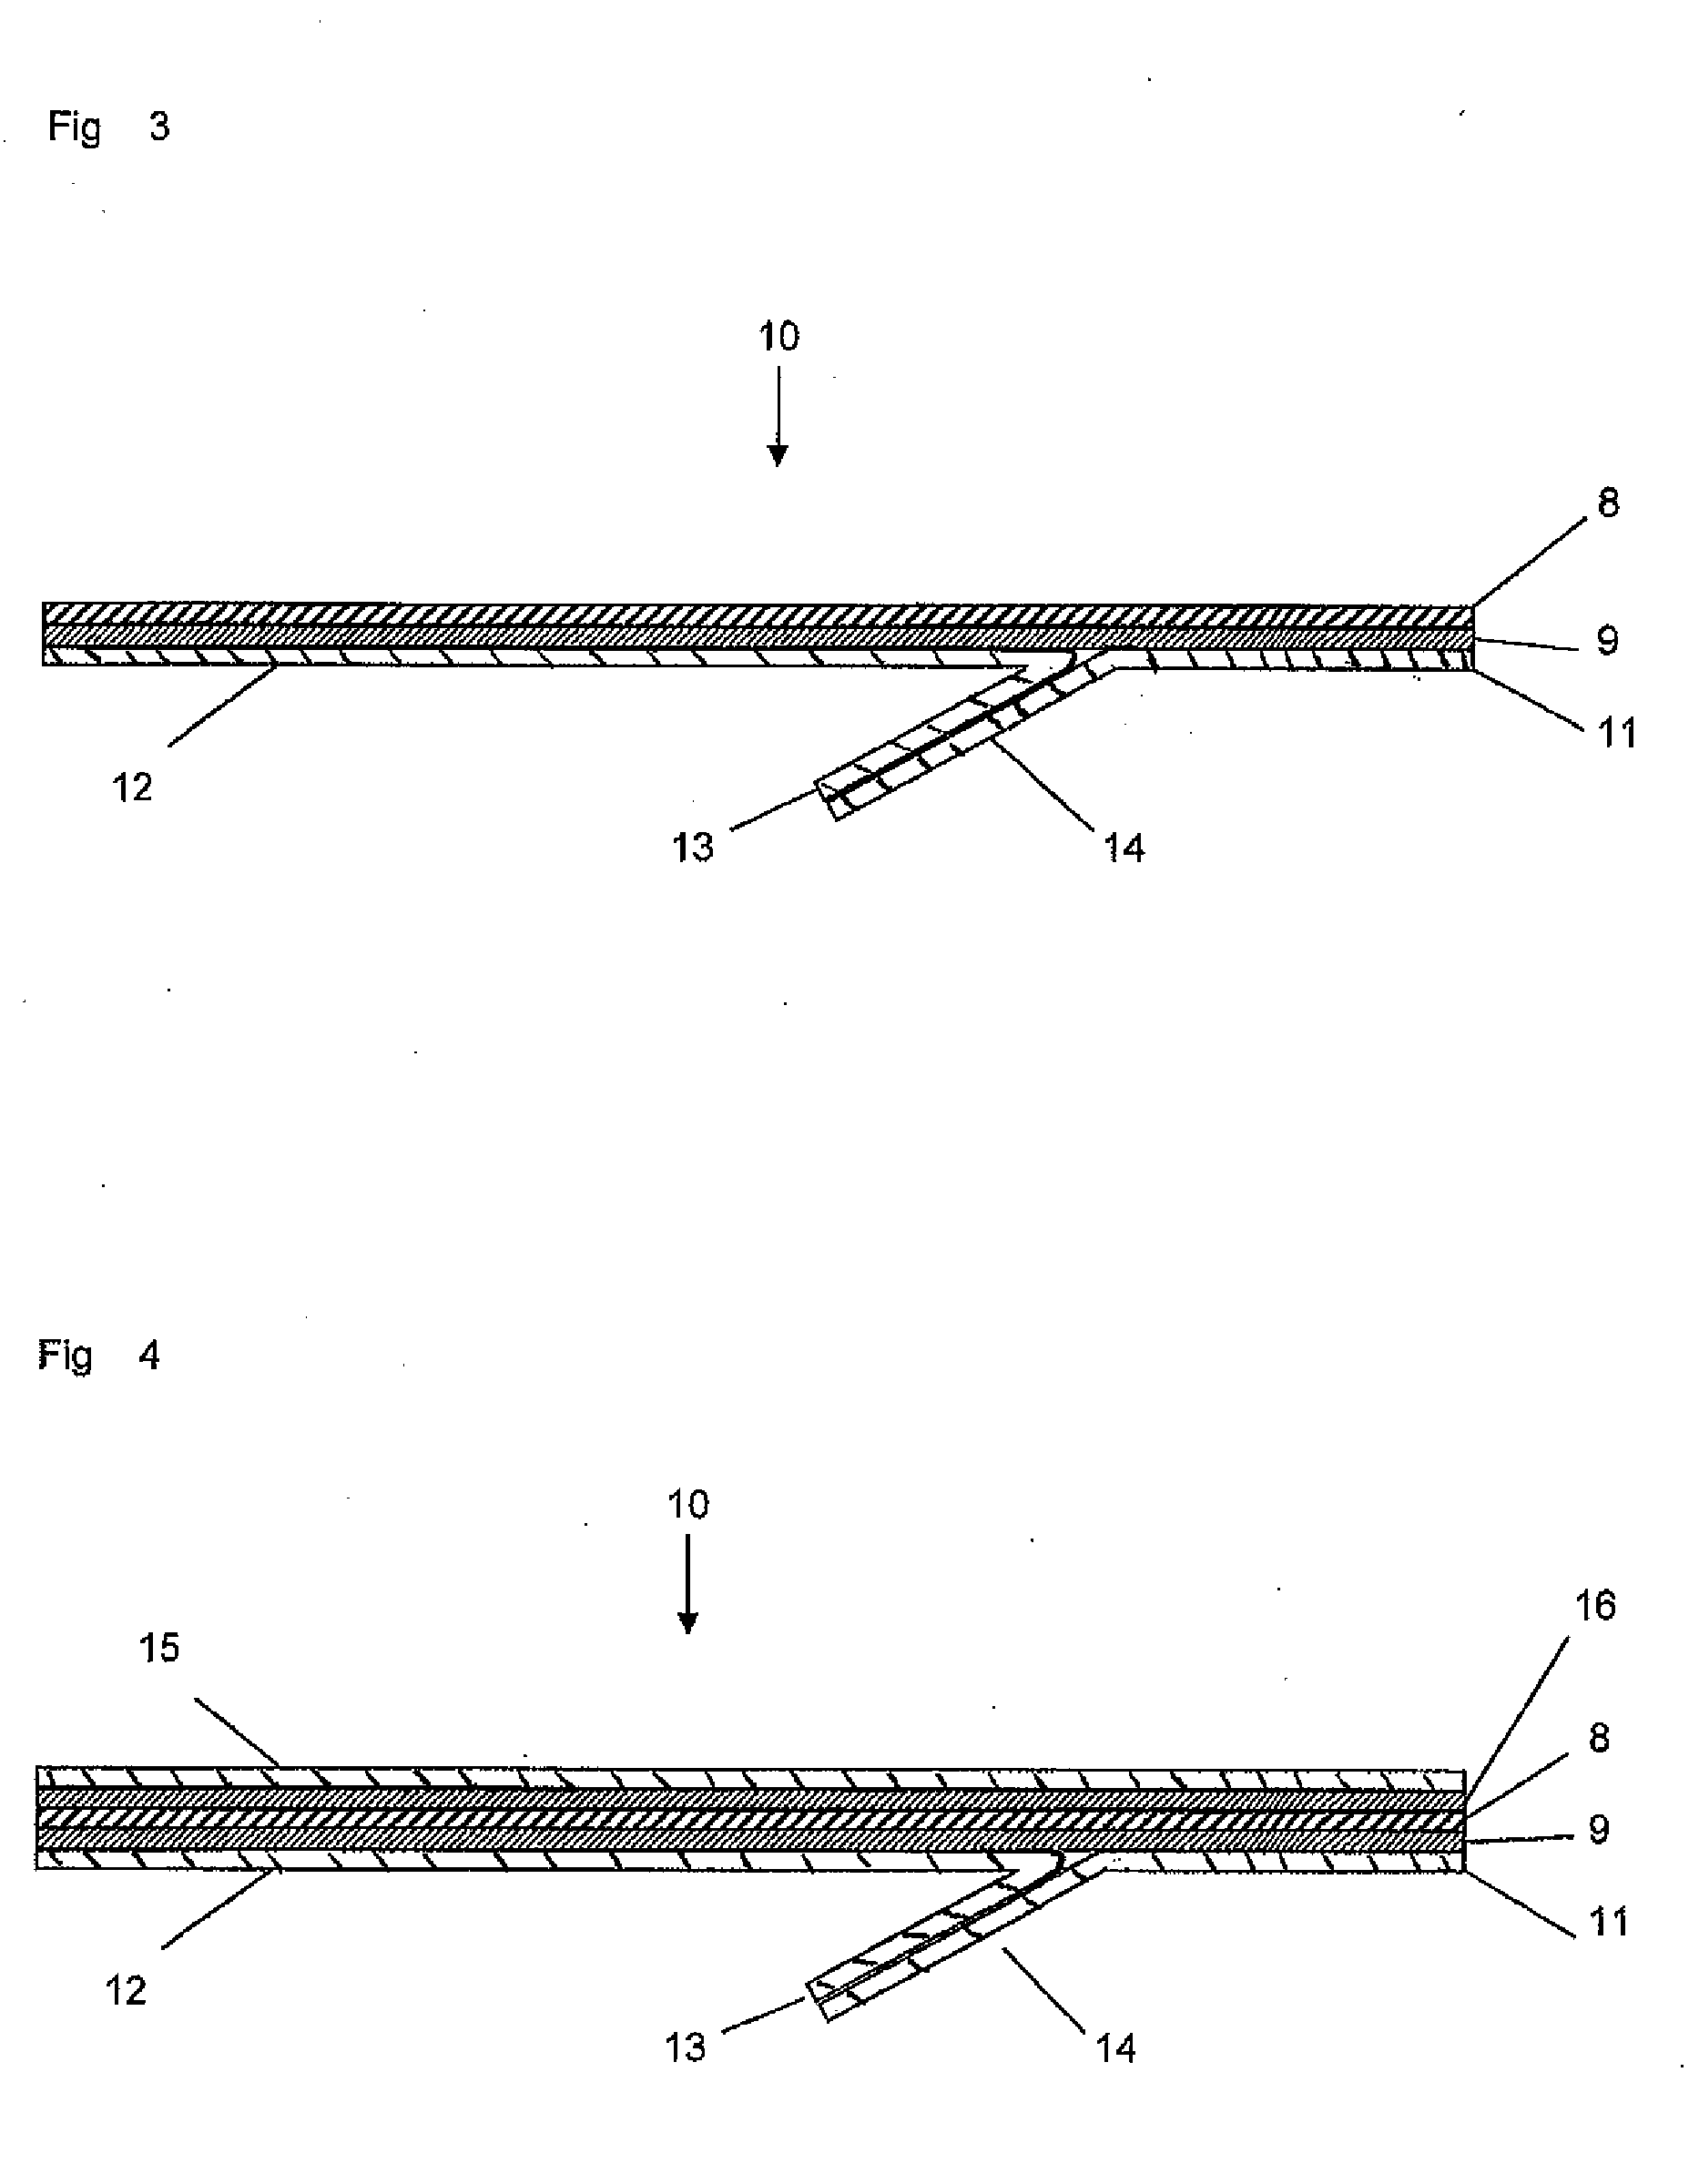 Element for facilitating the cutting to size of a dressing for vacuum therapy of a wound